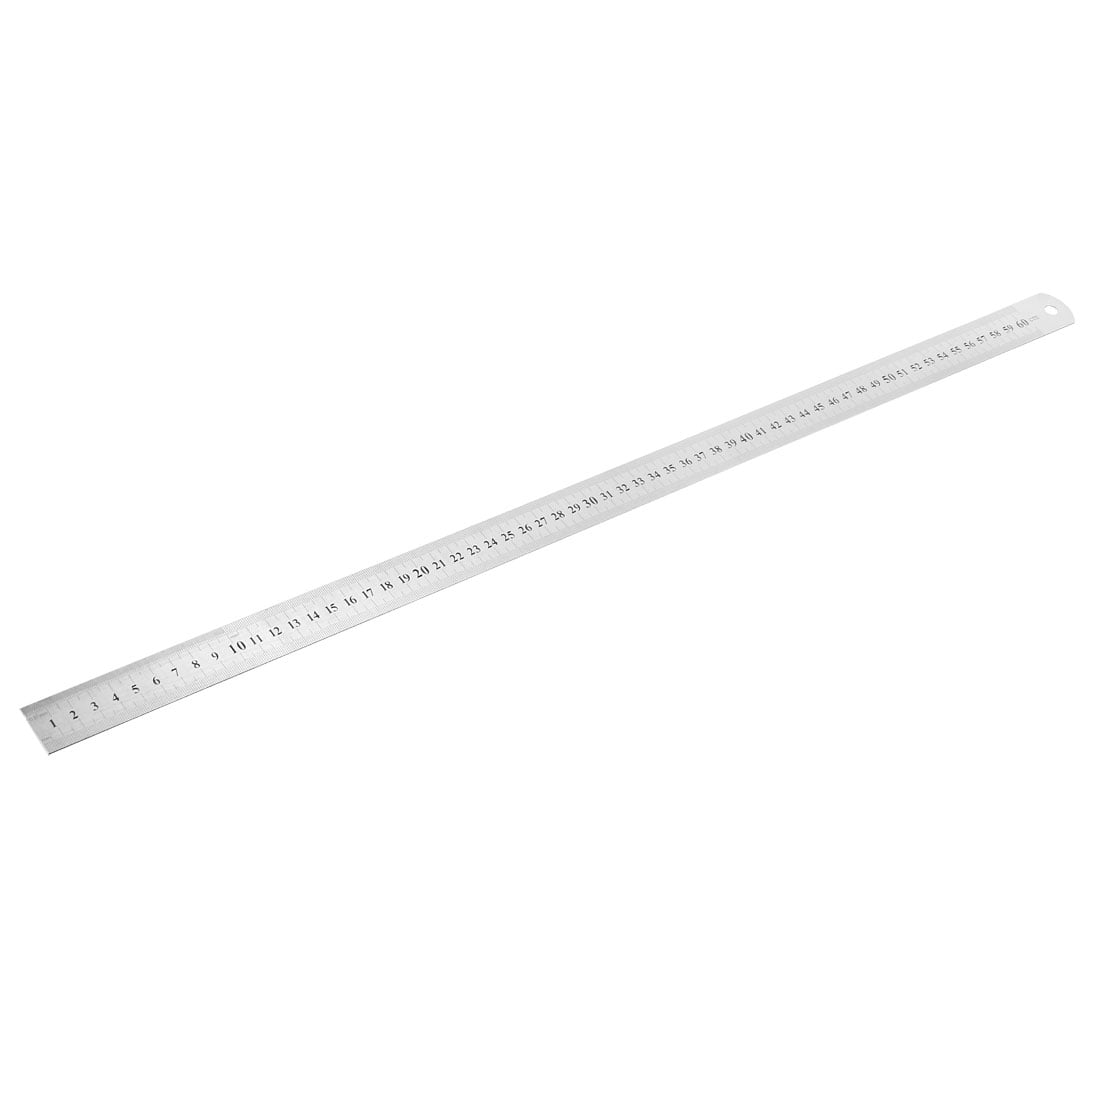 Details about   24 Inch Ruler 60 cm Ruler 2 Decimal Feet Stainless Steel Ruler Engineer Scale 